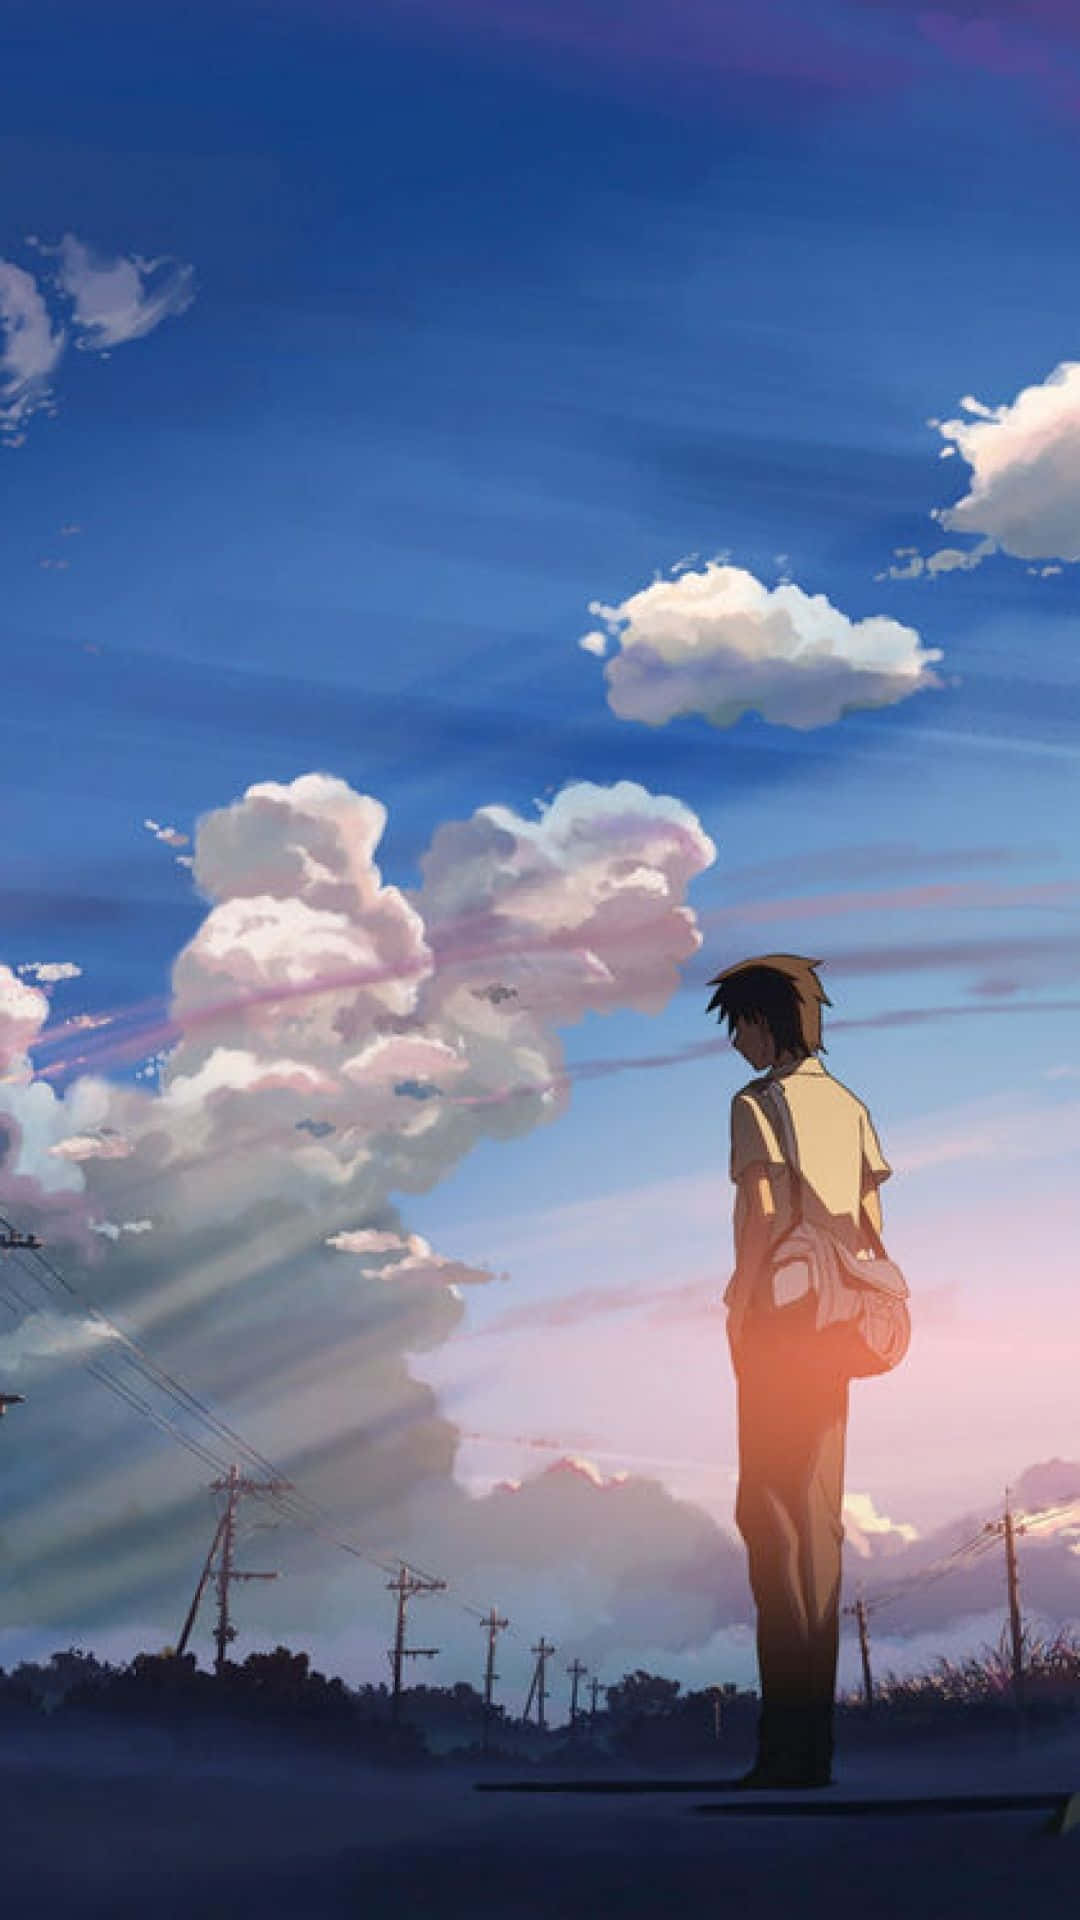 Get lost in the beautiful Anime Sunset Wallpaper